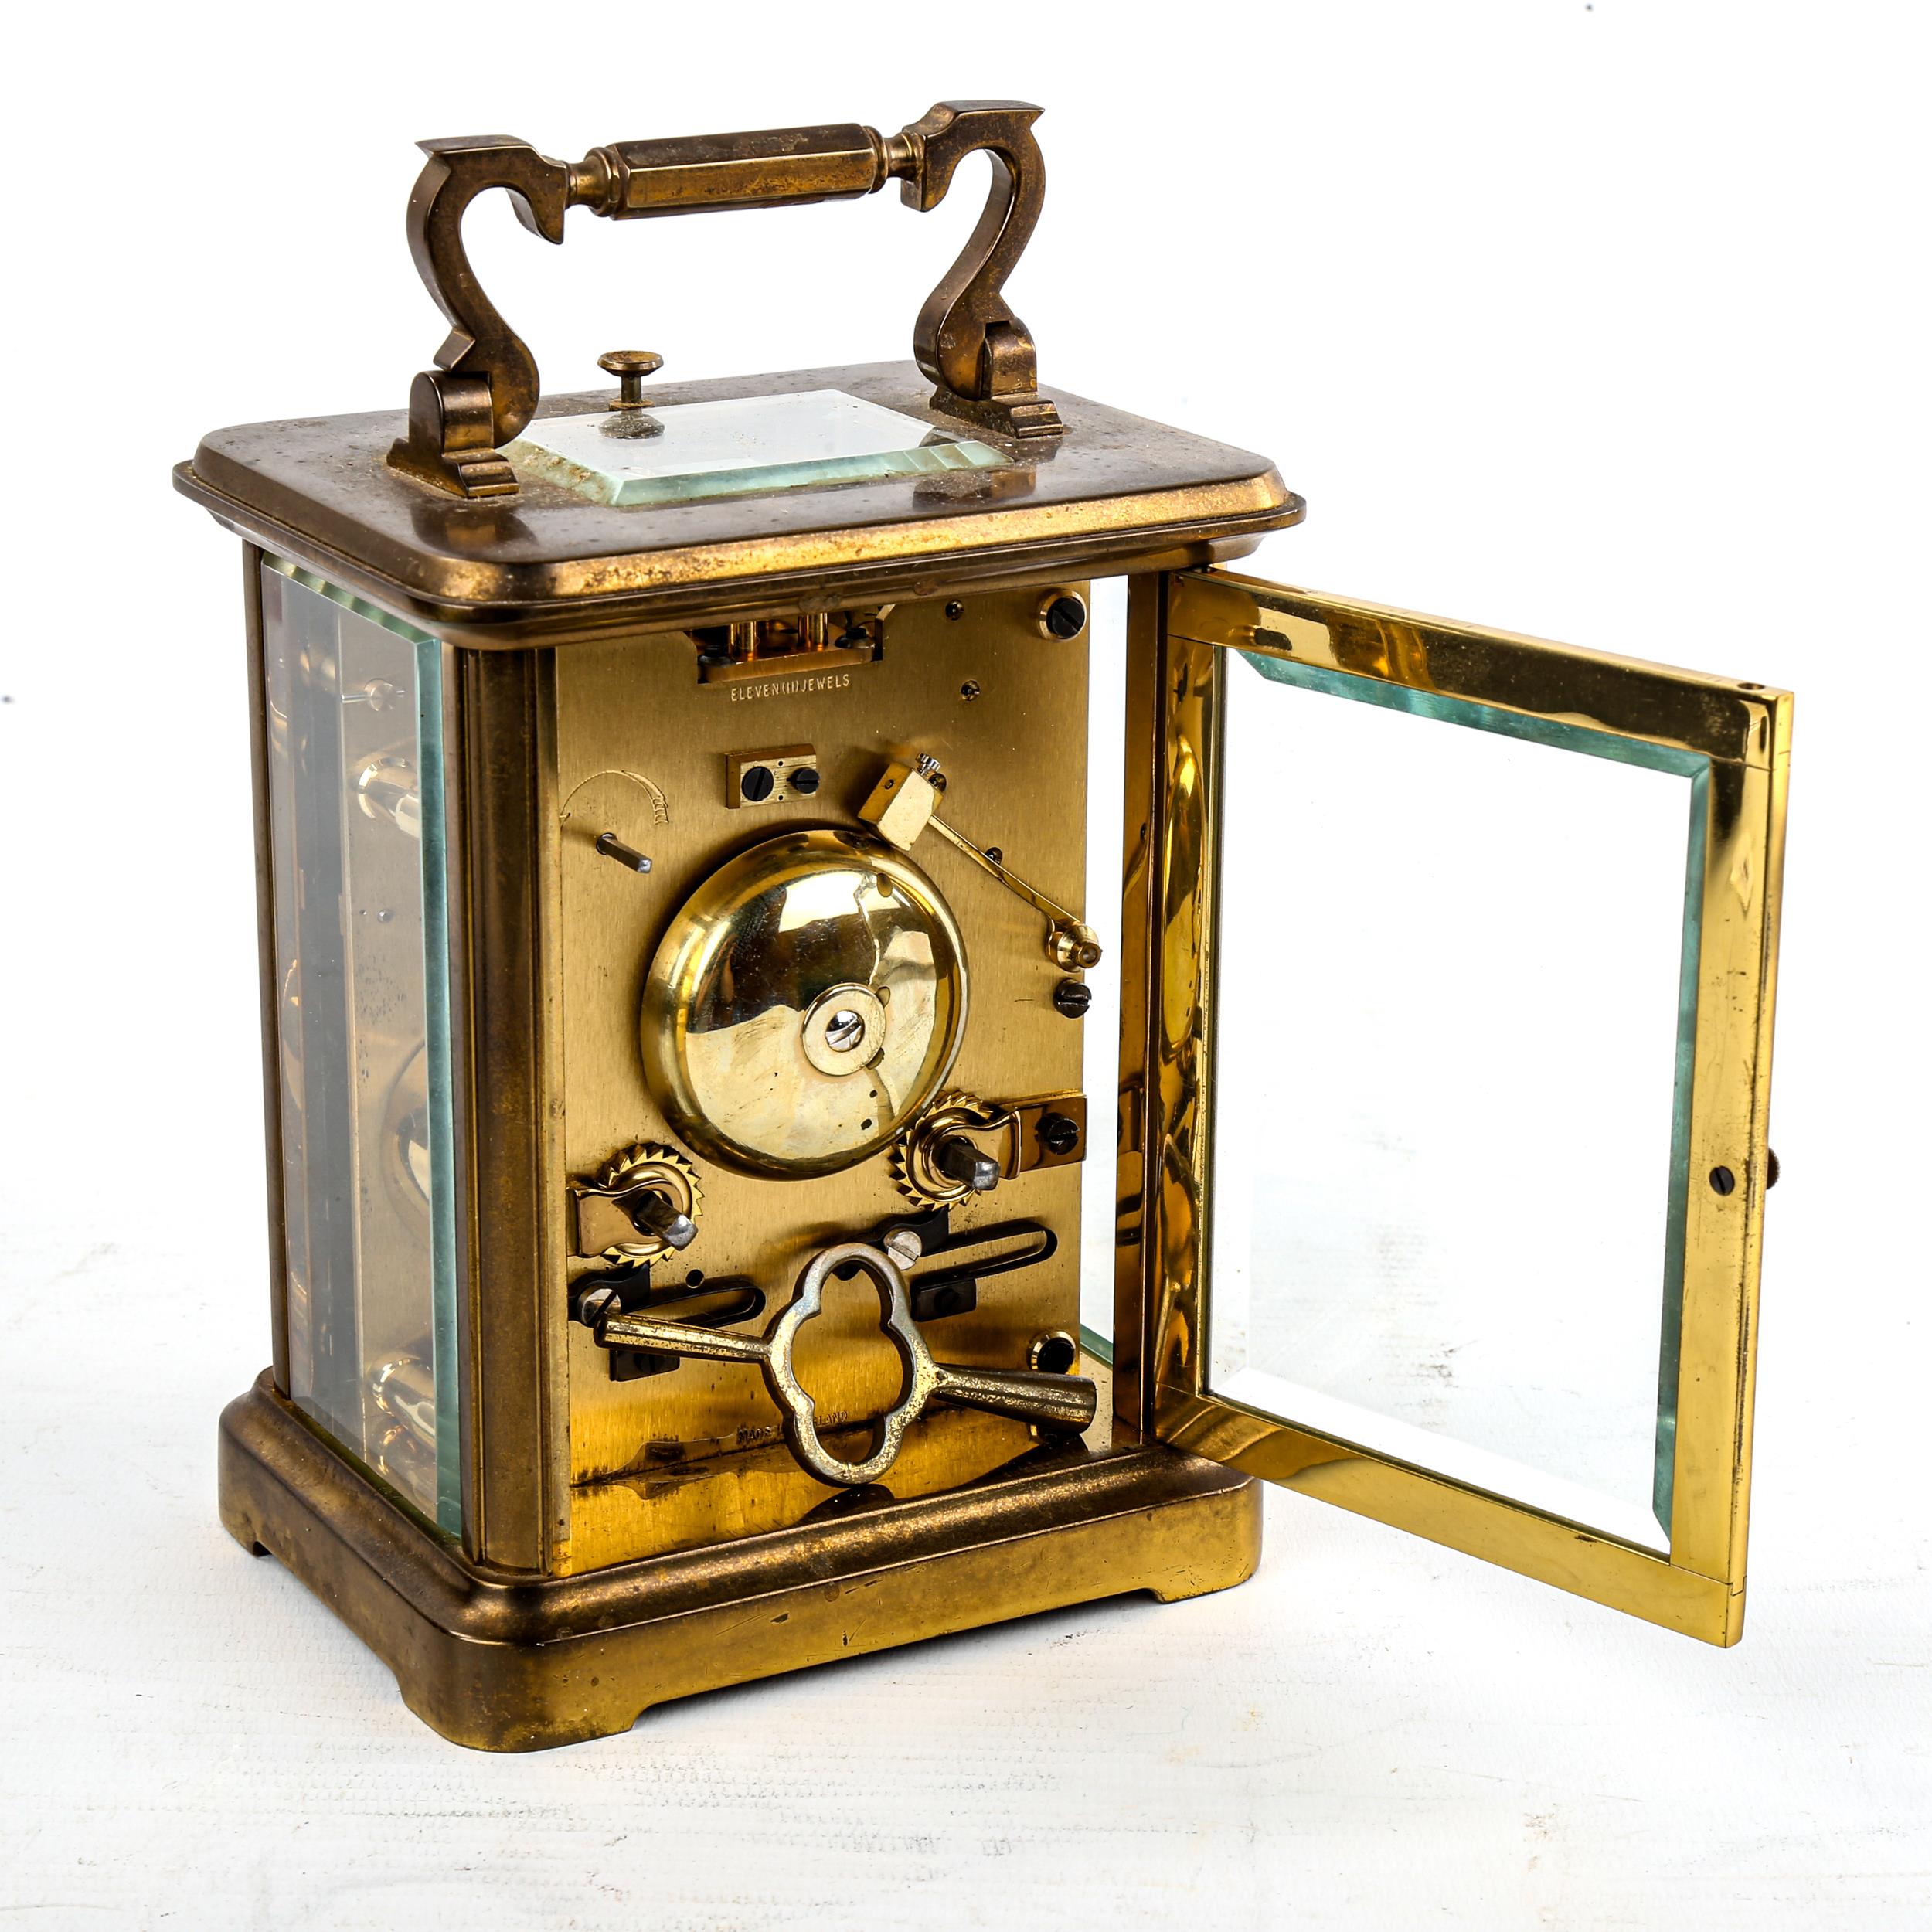 A large brass-cased repeating carriage clock, by Charles Frodsham of London, white enamel dial - Image 3 of 5